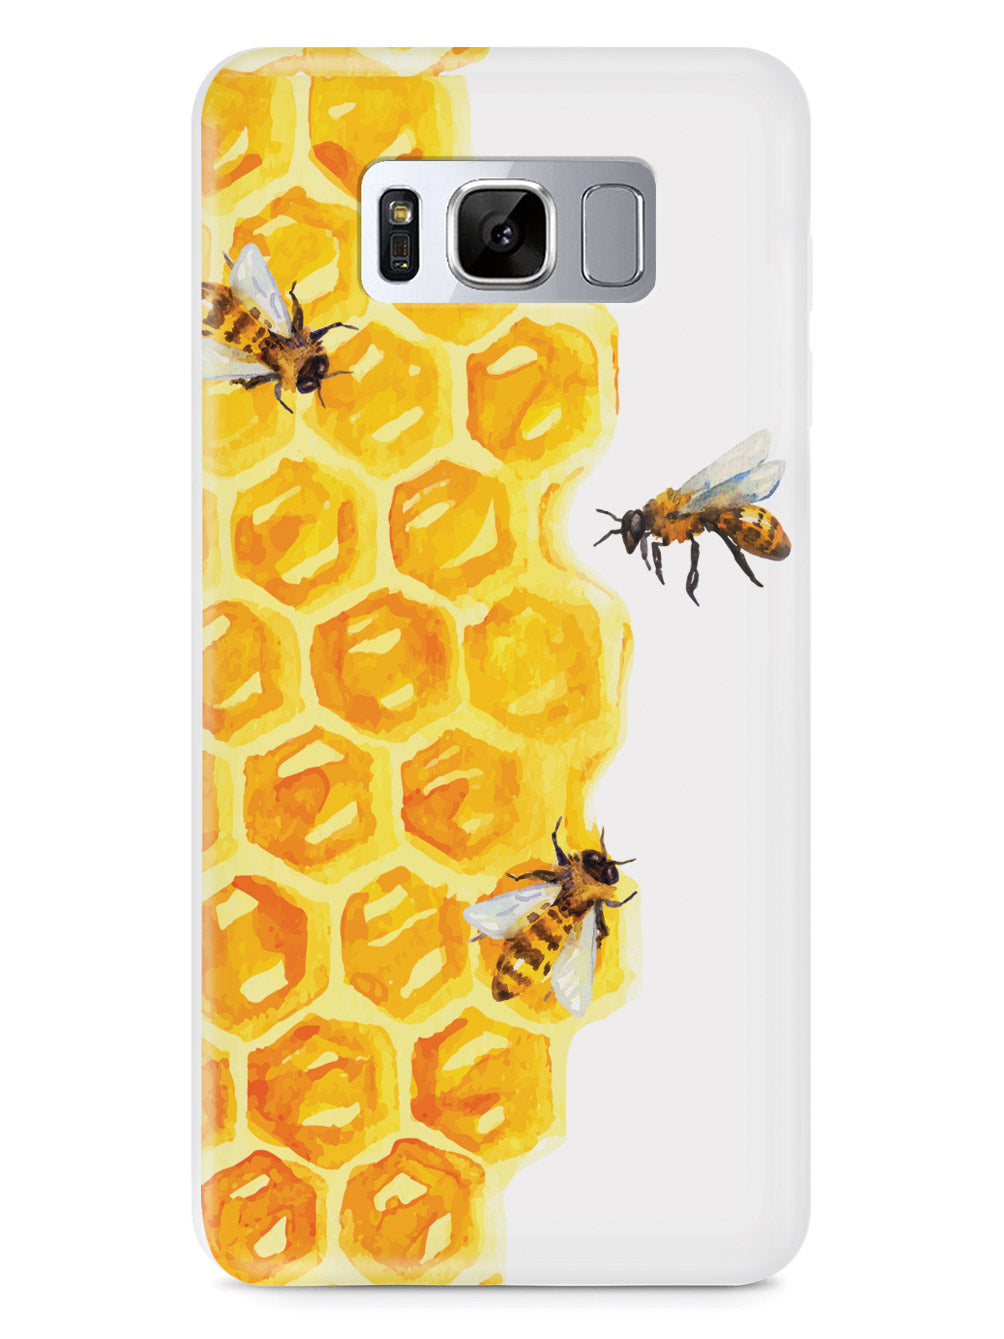 Watercolor Bees on Honeycomb - White Case